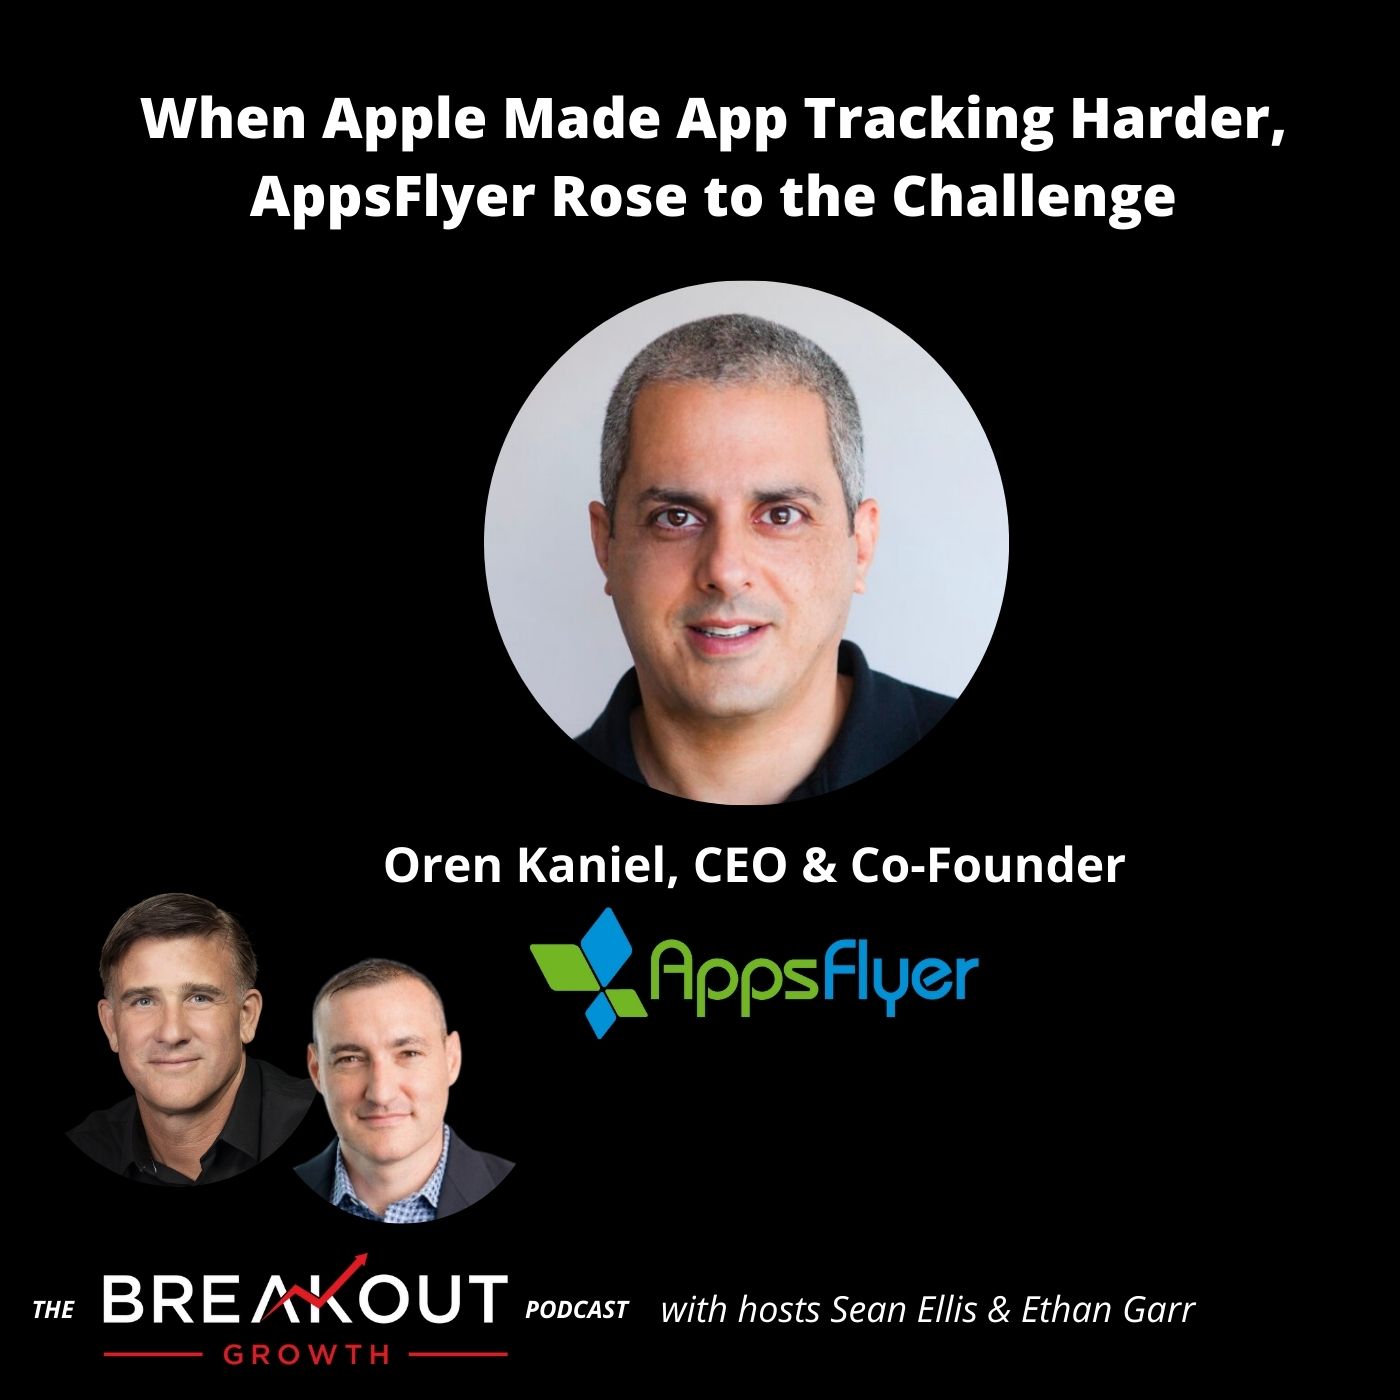 When Apple Made App Tracking Harder, AppsFlyer Rose to the Challenge